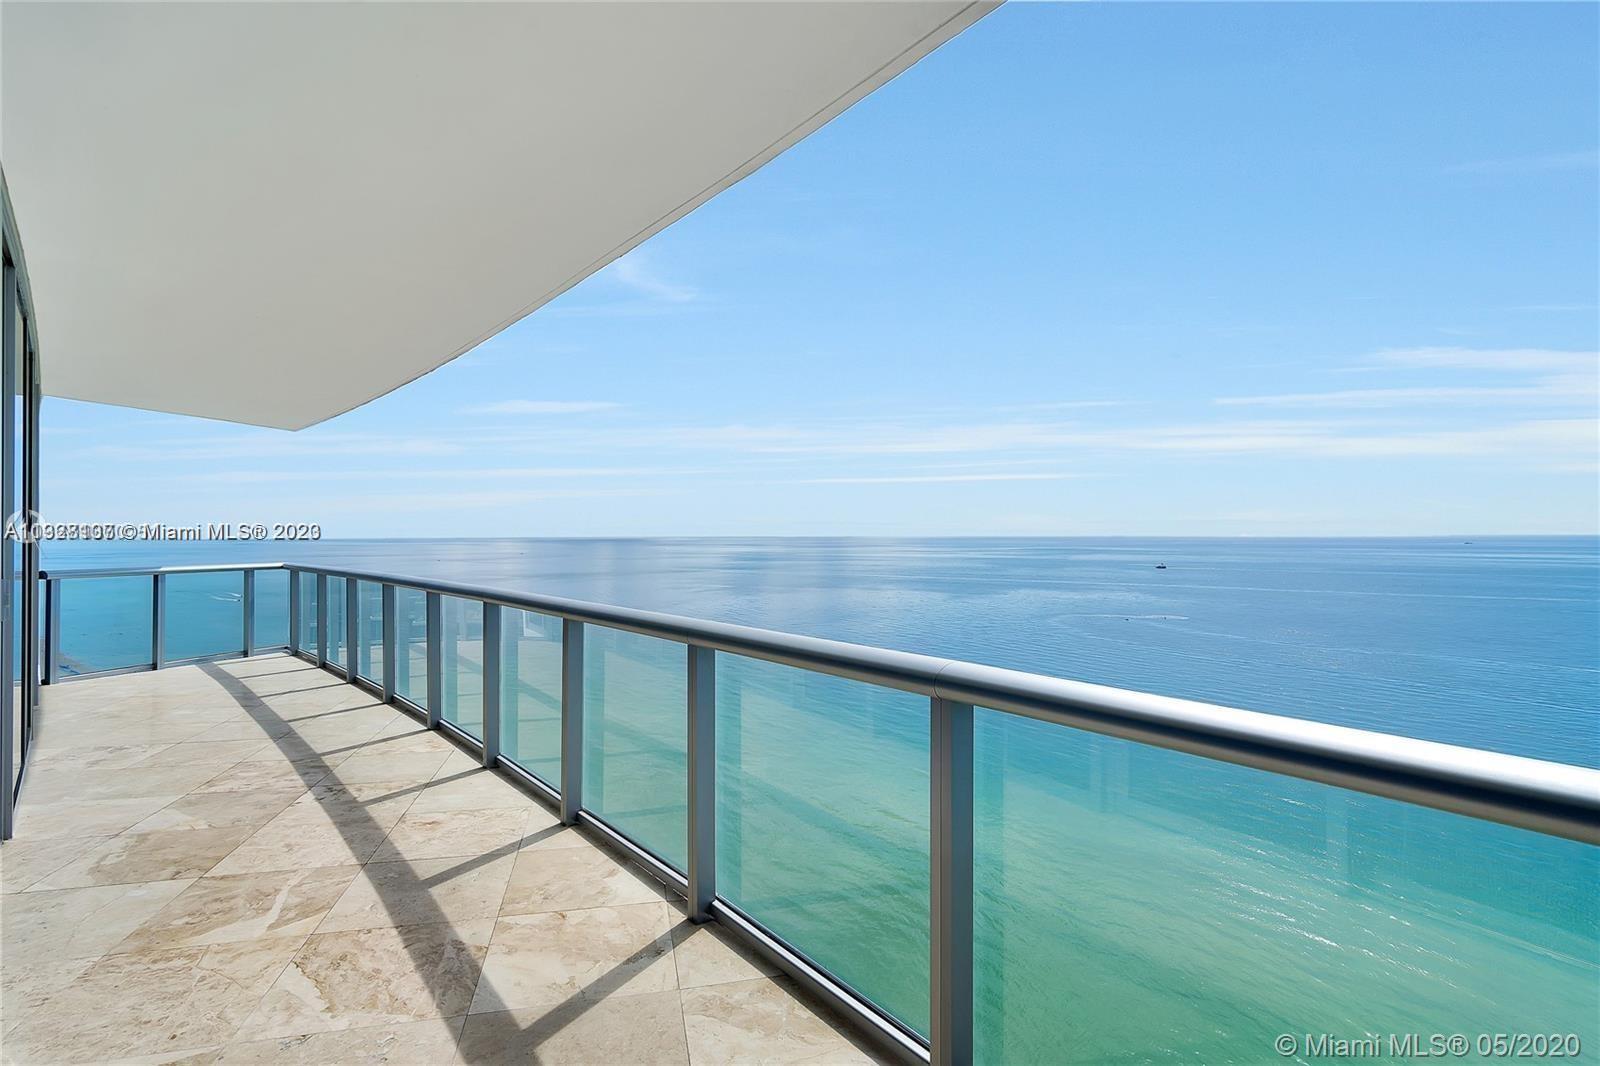 Come fall in love with Jade Beach # 2807, this amazing oceanfront condo features 1479 SqFt of living areas, direct ocean views from kitchen, living / dinning room, master bedroom and second bedroom. Ample balcony with 40 linear feet, a den with its own full bathroom that can be used as office, games room or visitors room. Reach the unit through its private elevator. Jade Beach is a luxurious full service building with hotel like amenities featuring beach & pool service, on site restaurant, concierge, spa, gym, meeting rooms, and more. Available to move in on 03/20/23. Will not last! Contact listing agent for showing and information.